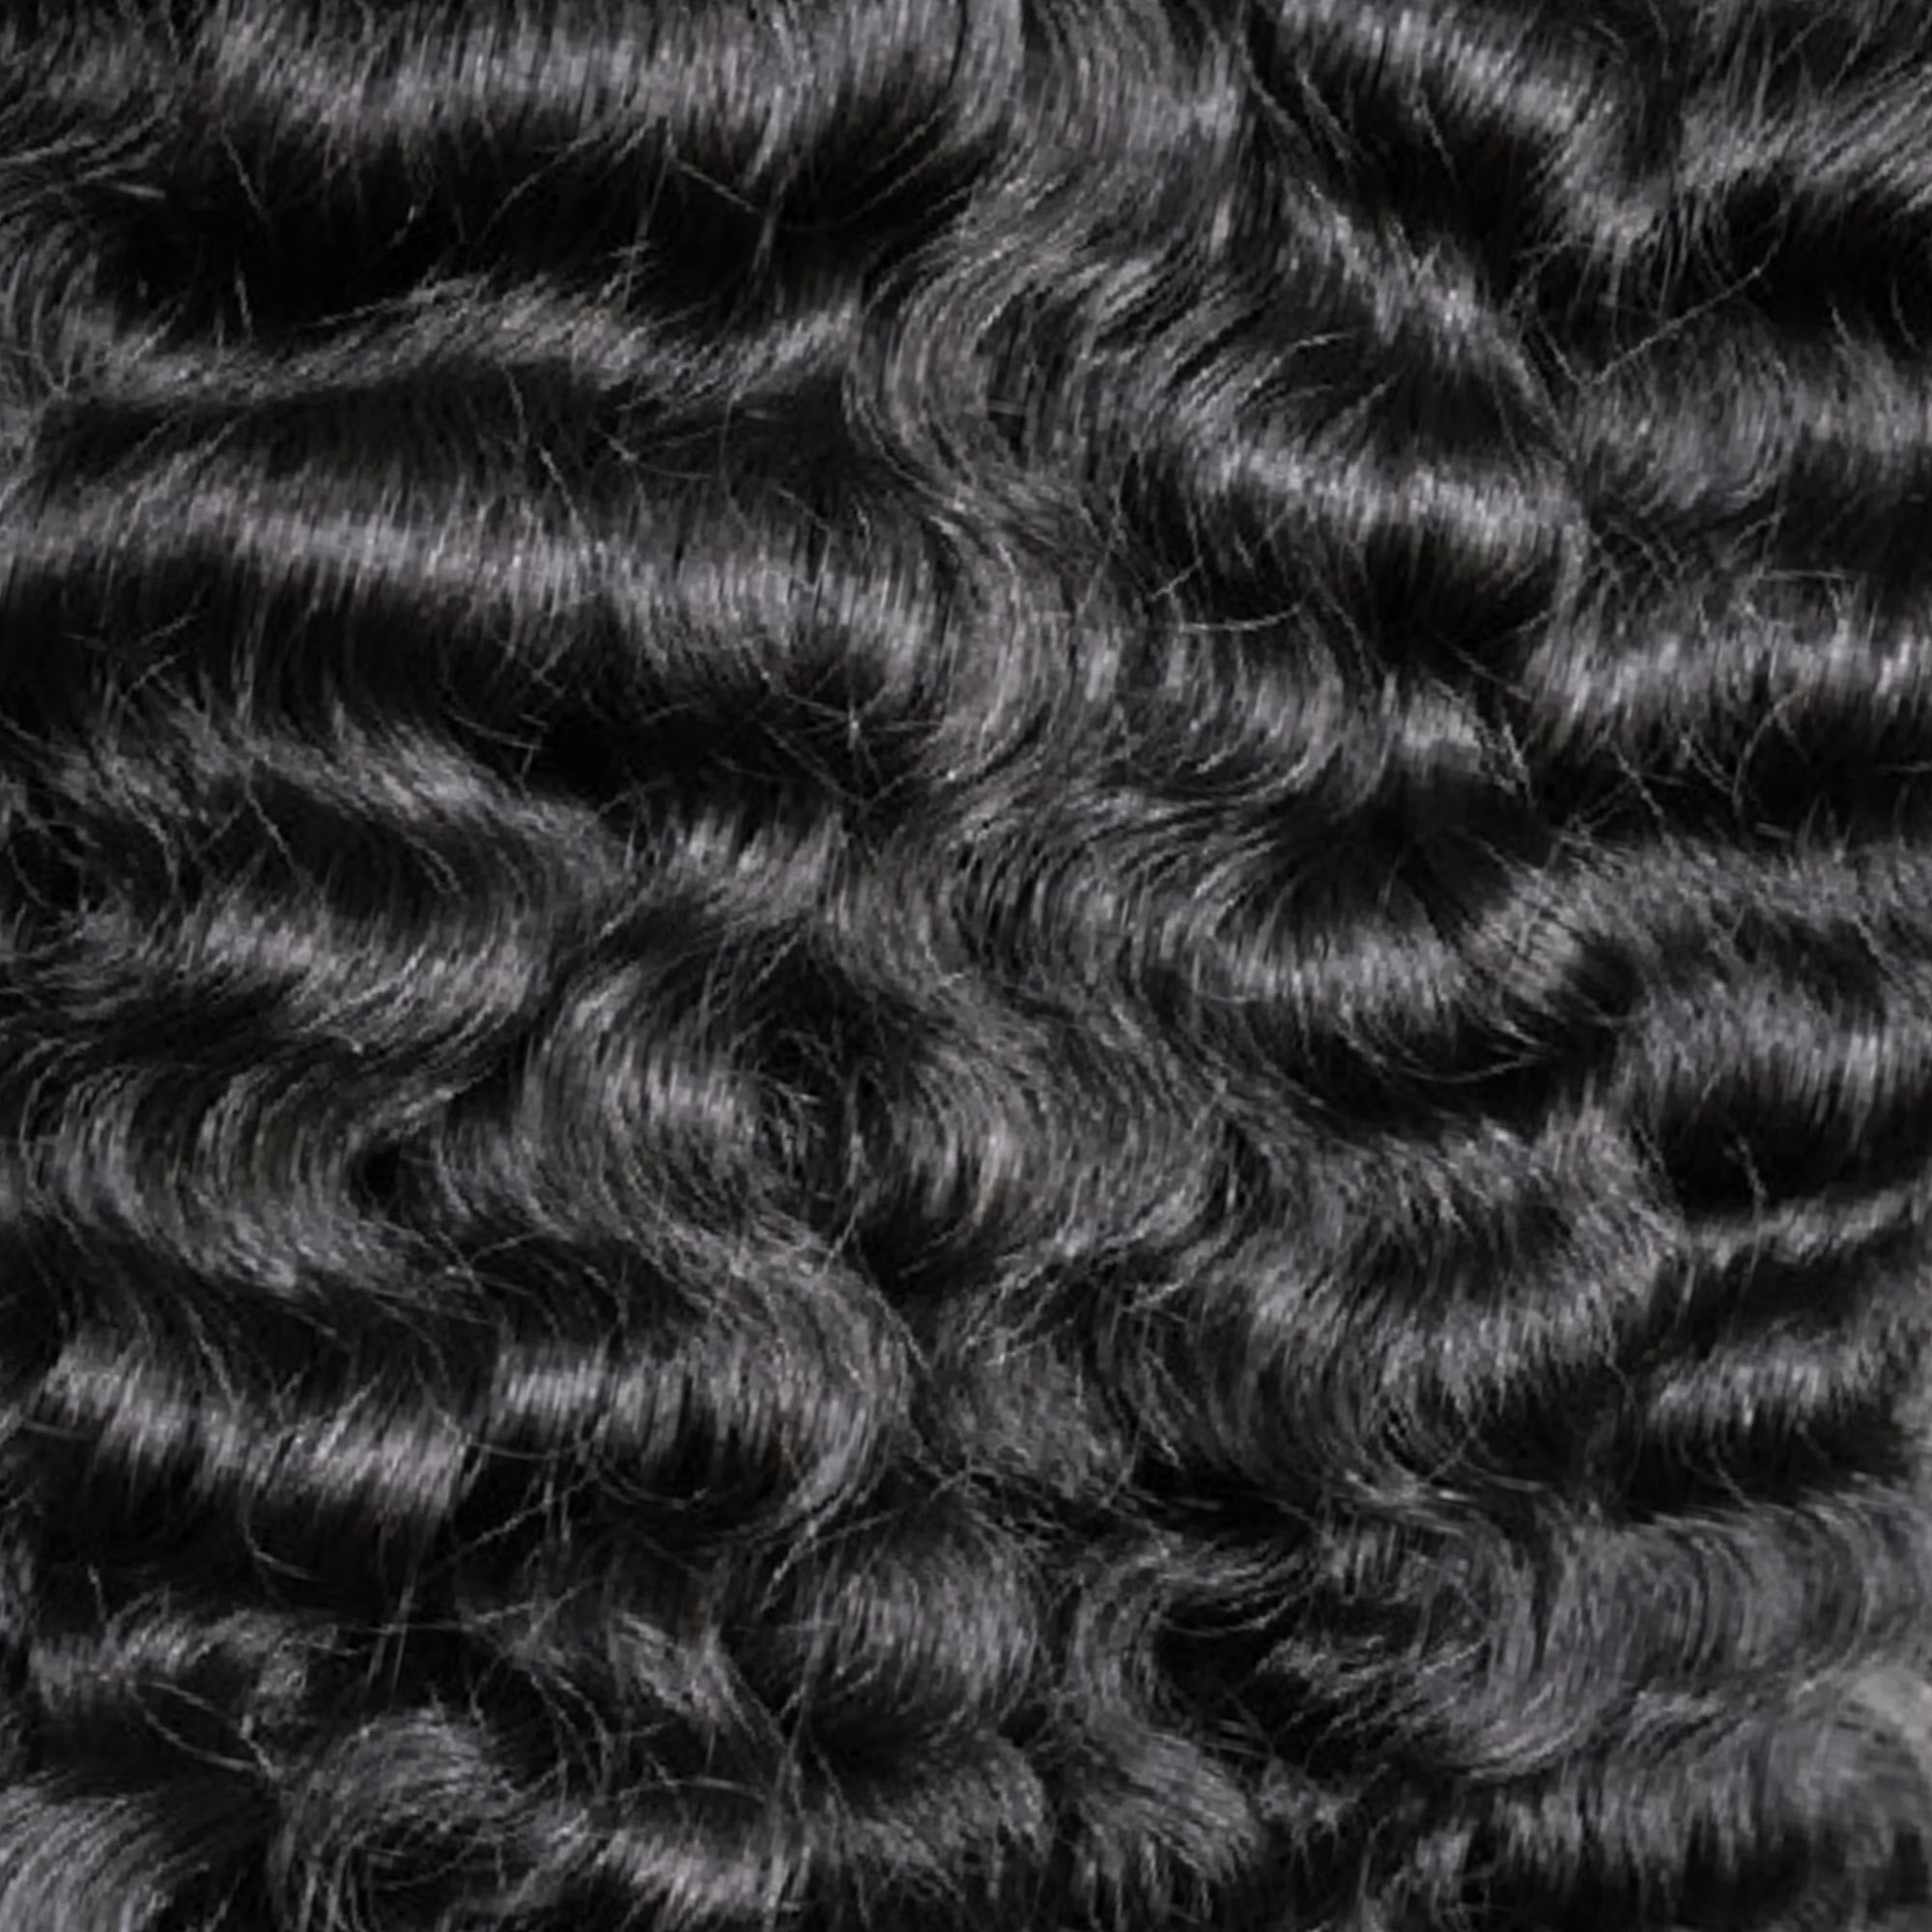 Raw Laotian Loose Curly Hair Weft Raw Lao Hair  TRVHB New Site